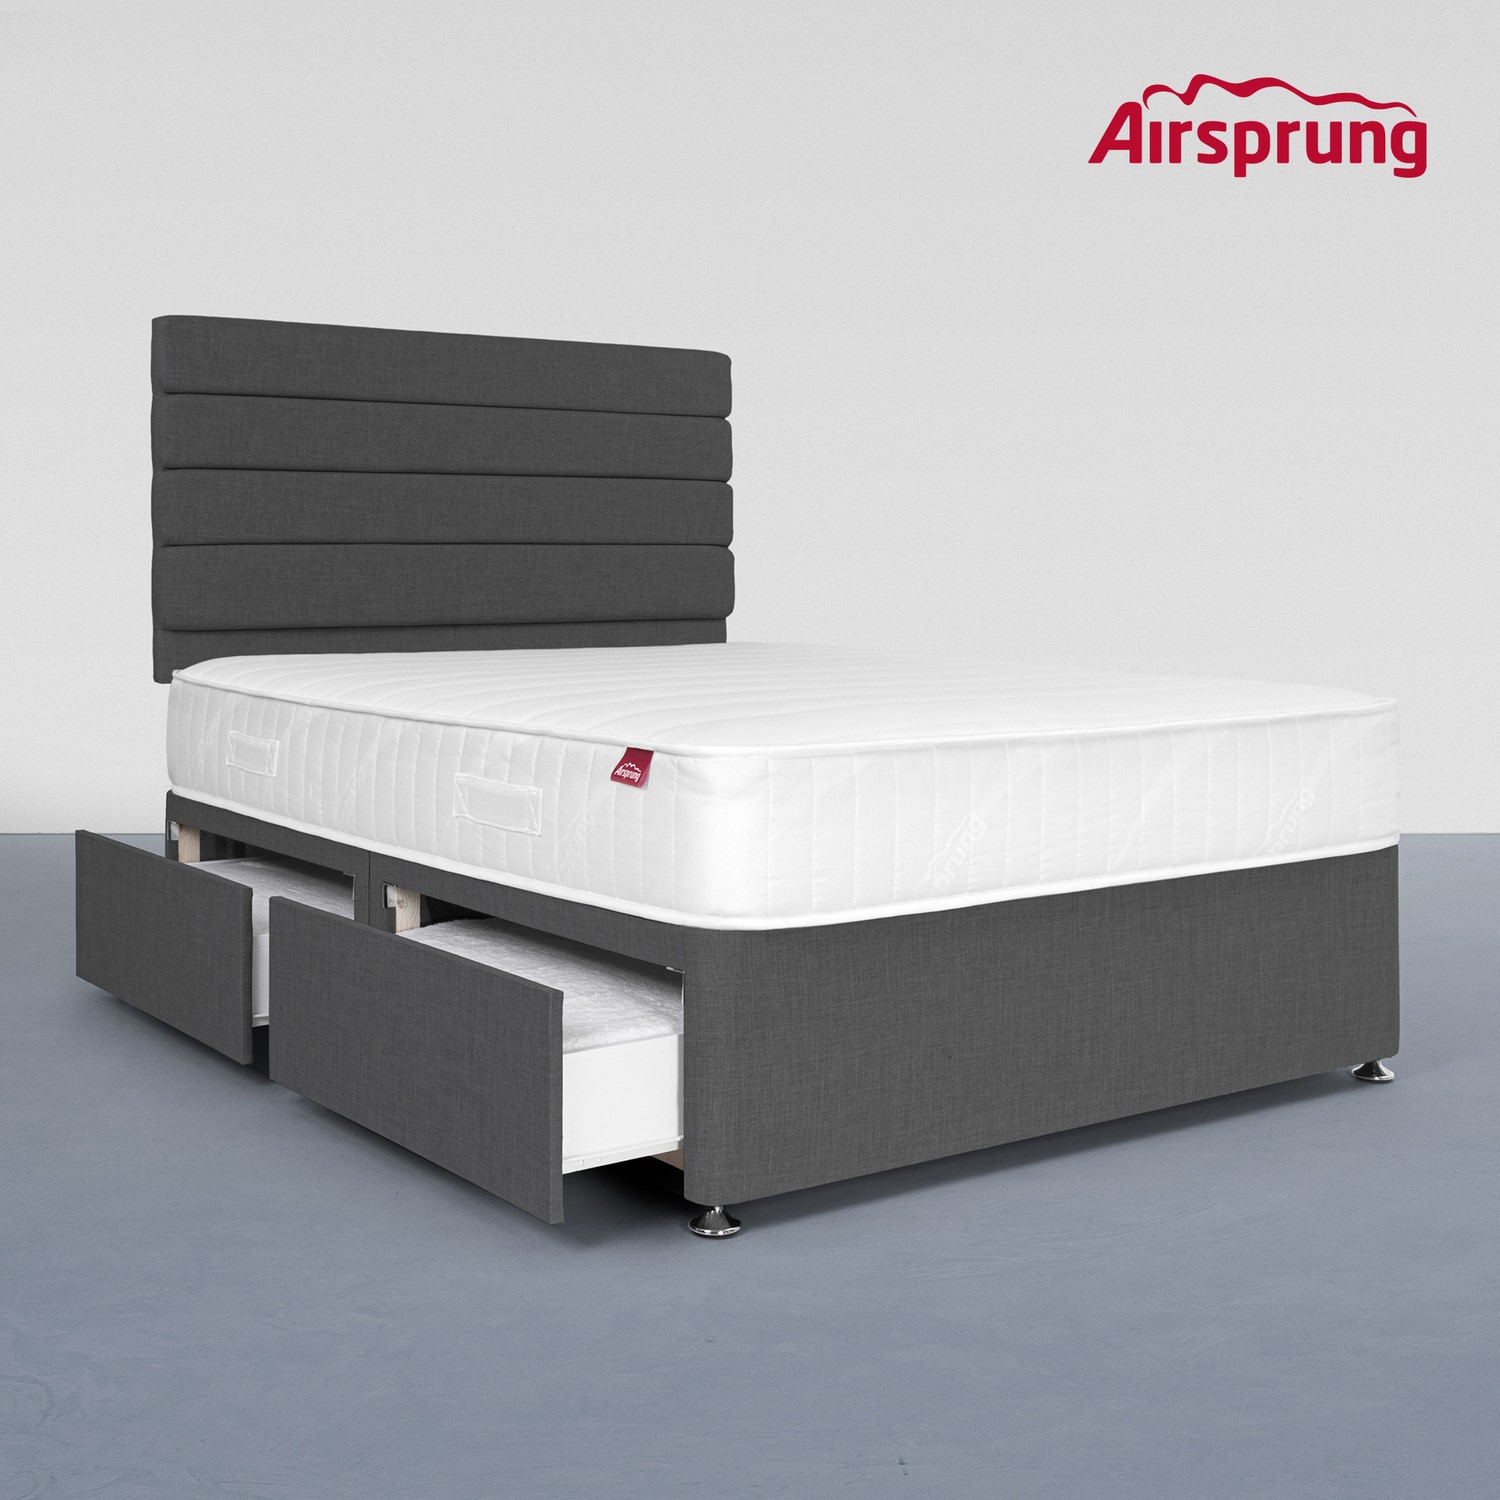 Read more about Airsprung king size 4 drawer divan bed with comfort mattress charcoal